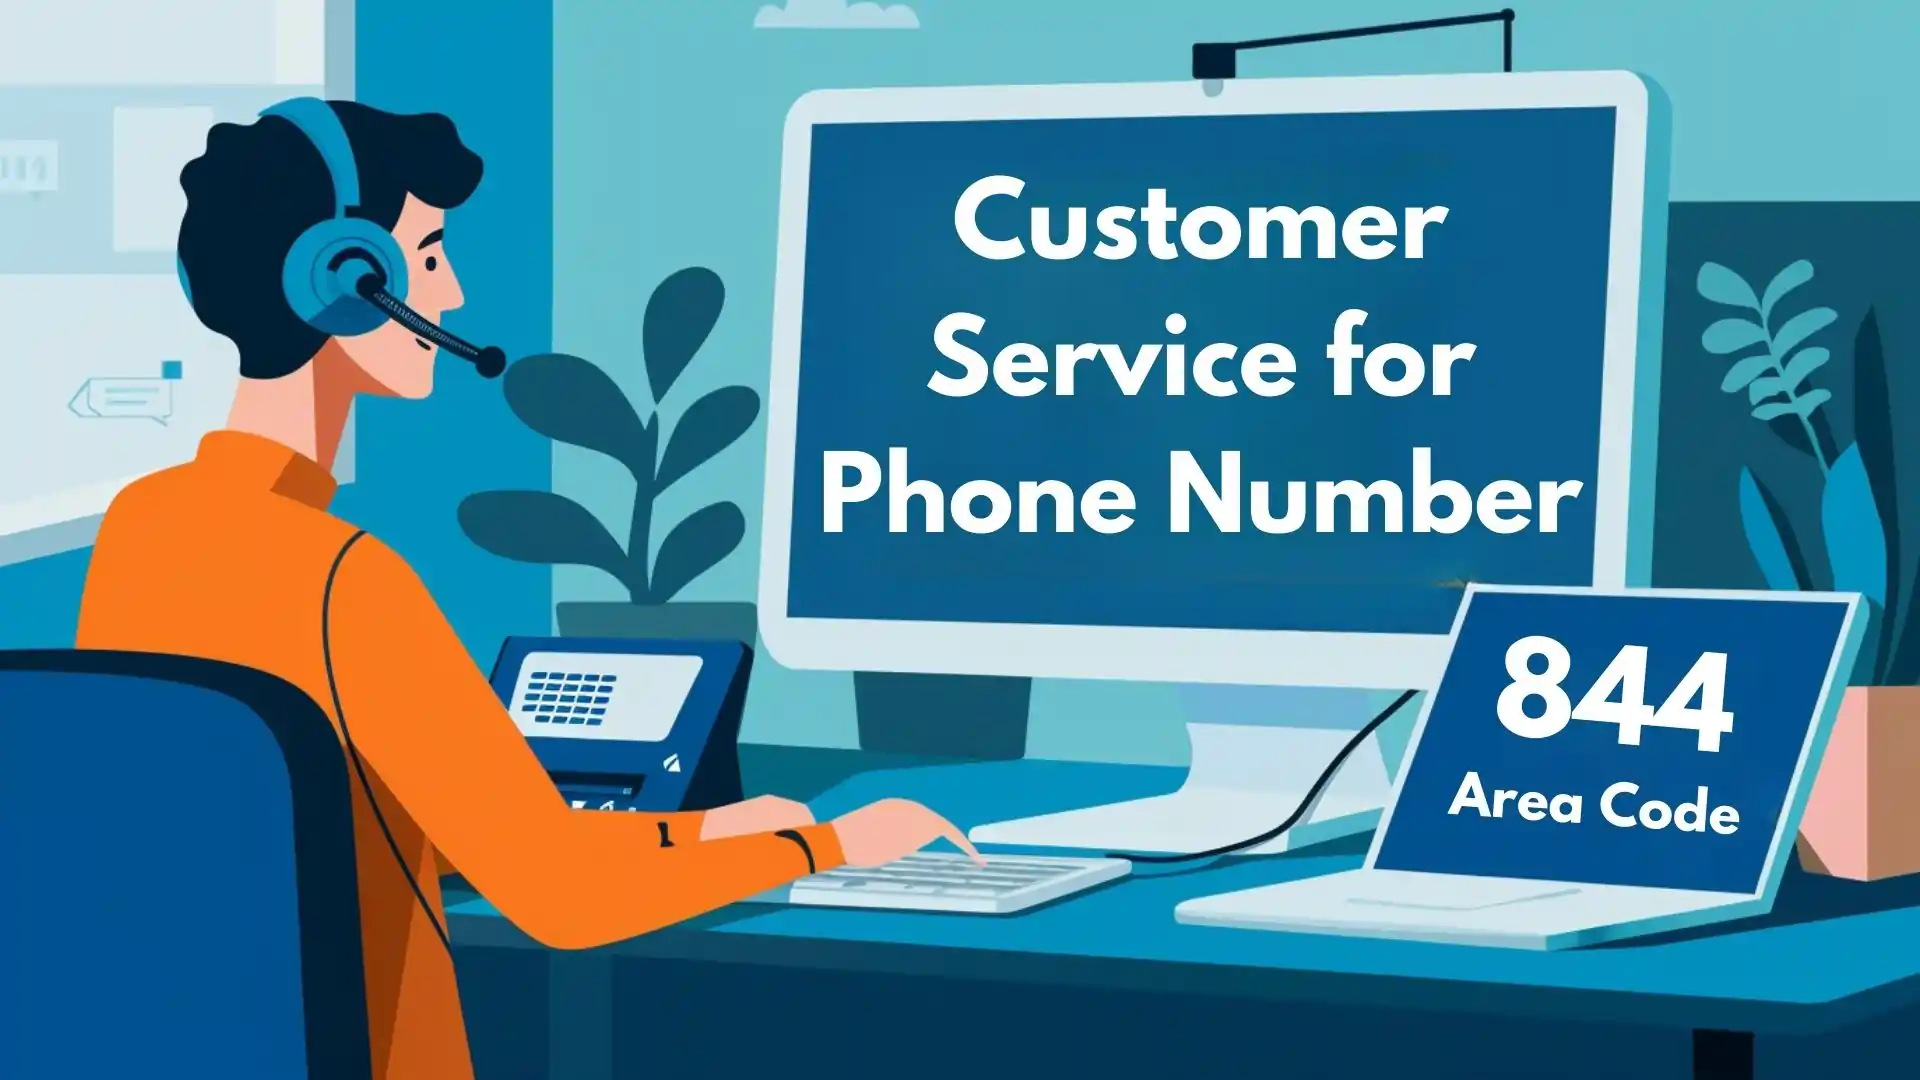 Customer Service for Phone Number